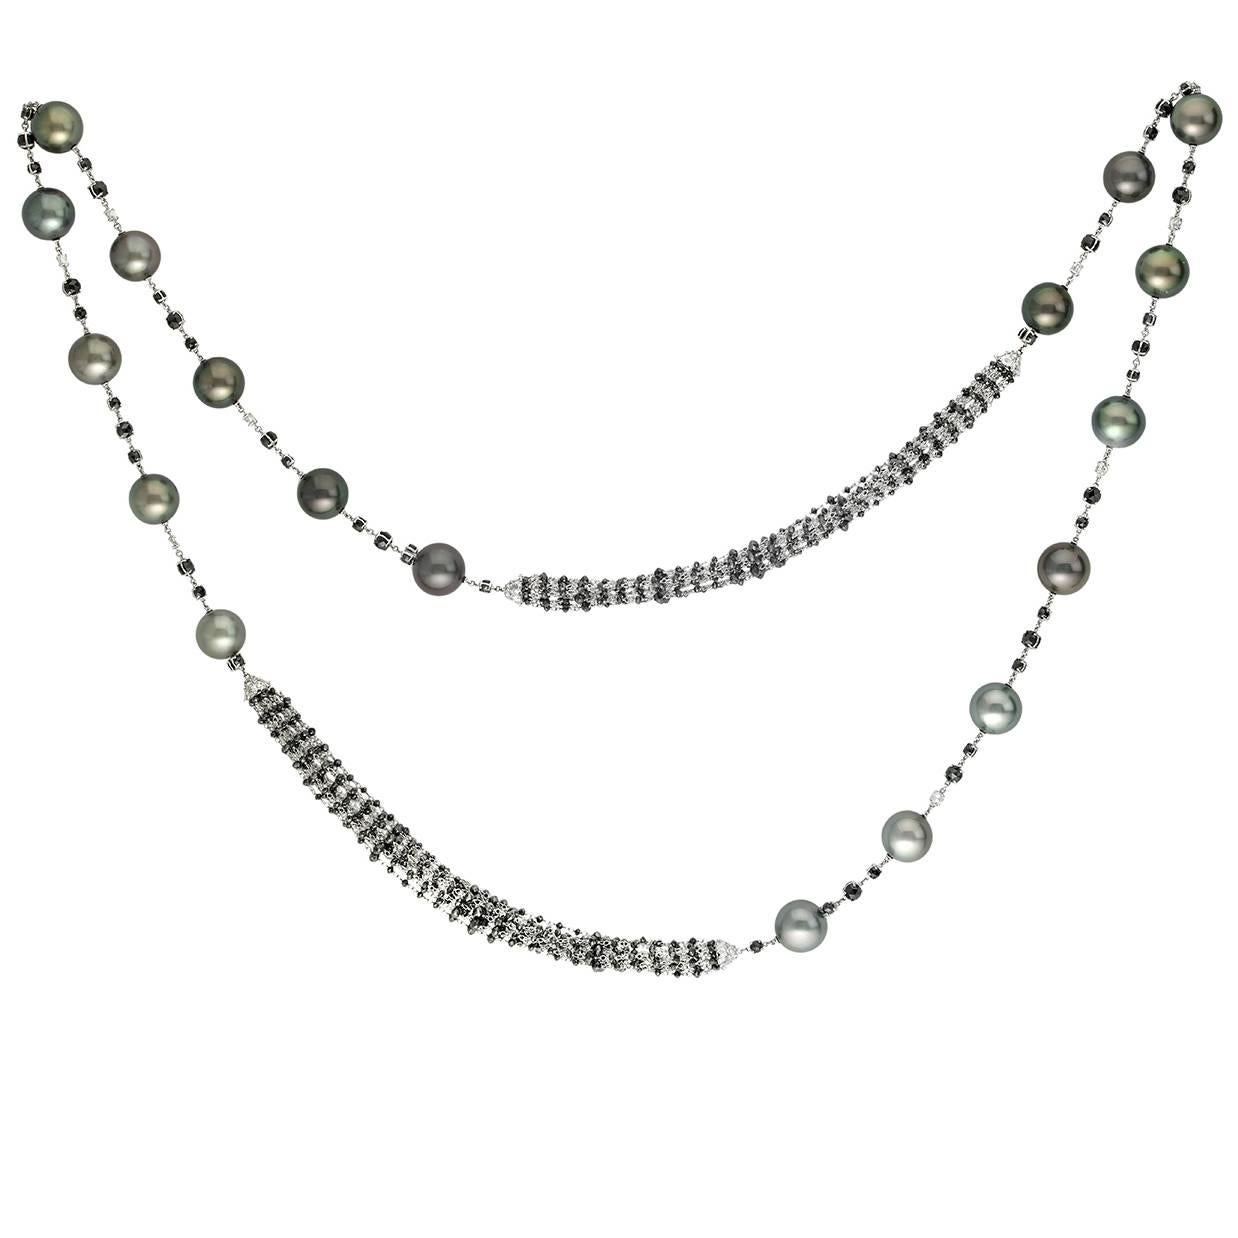 Missbach Transformer Necklace, Tahitian Pearls, Black and White Diamonds For Sale